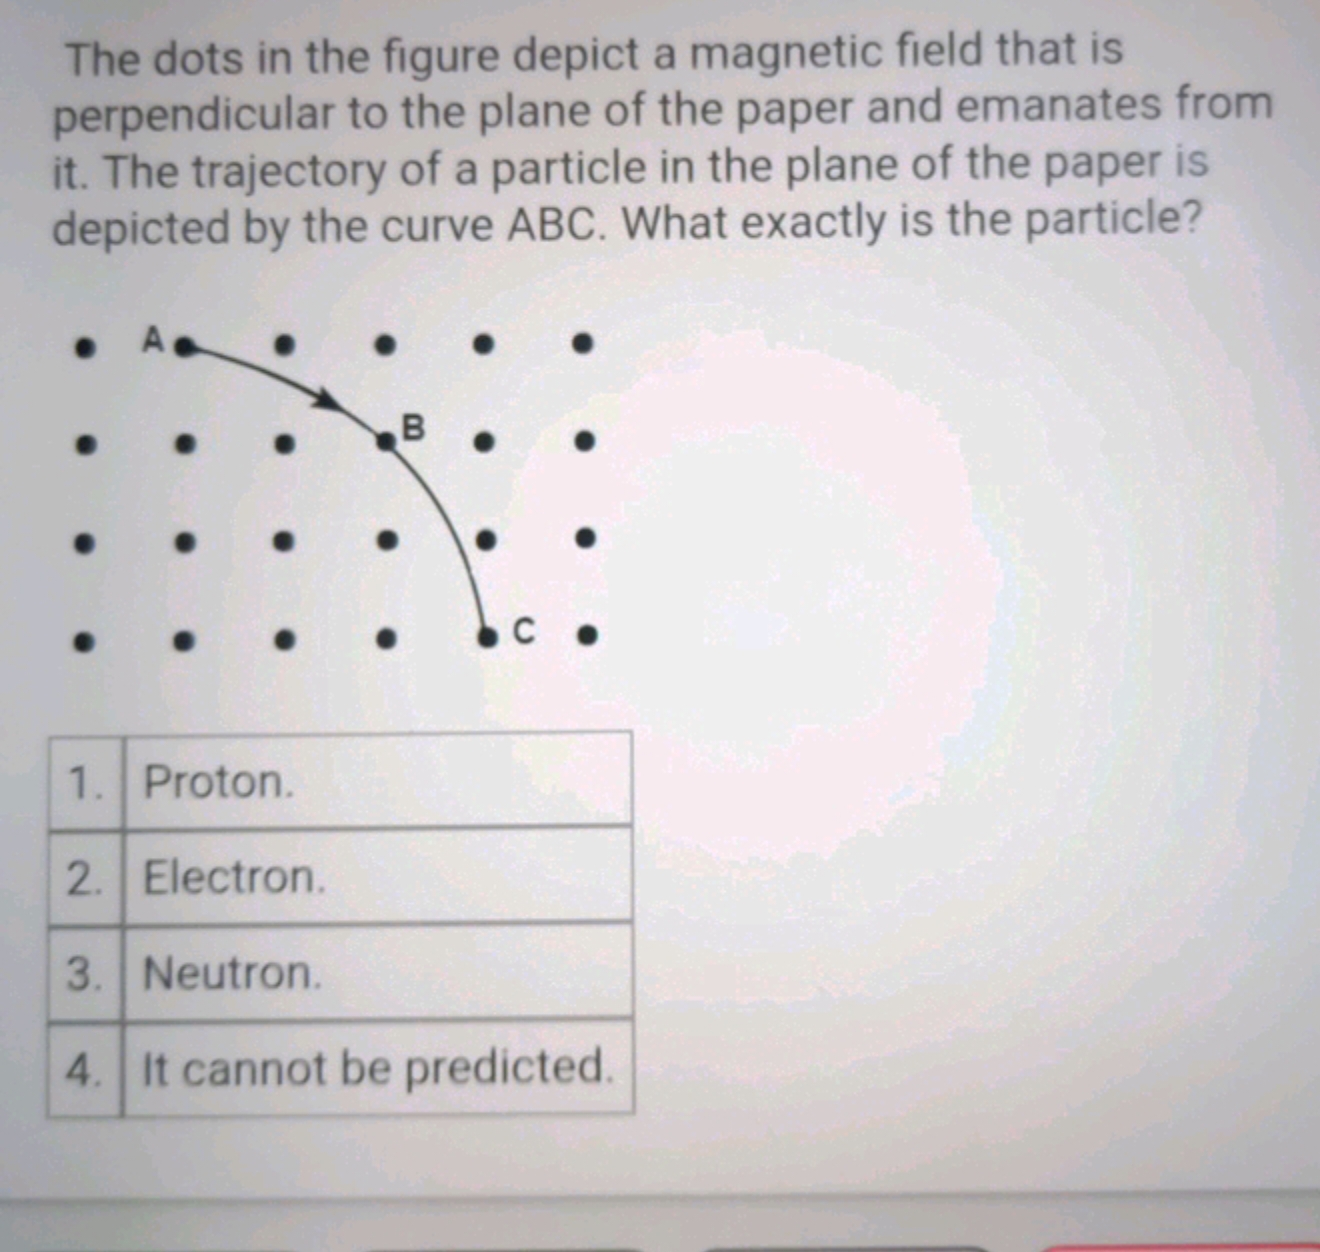 The dots in the figure depict a magnetic field that is perpendicular t